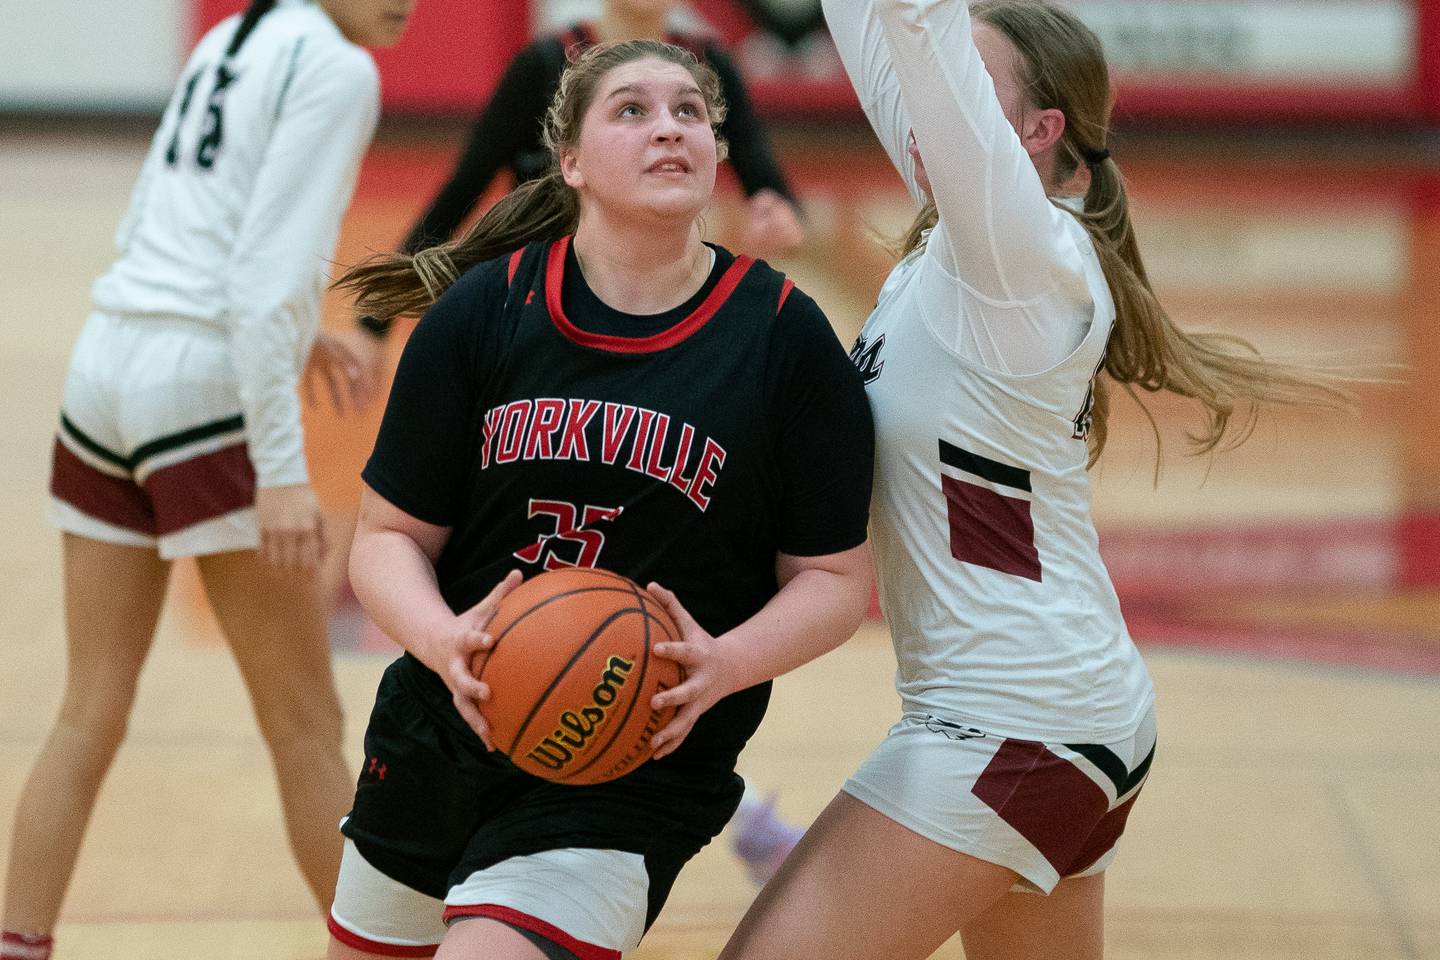 Yorkville's Madison Spychalski (35) posts up against Plainfield North's Isabella Gruber (23) during a Yorkville girls 4A regional semifinal basketball game at Yorkville High School on Tuesday, Feb 14, 2023.